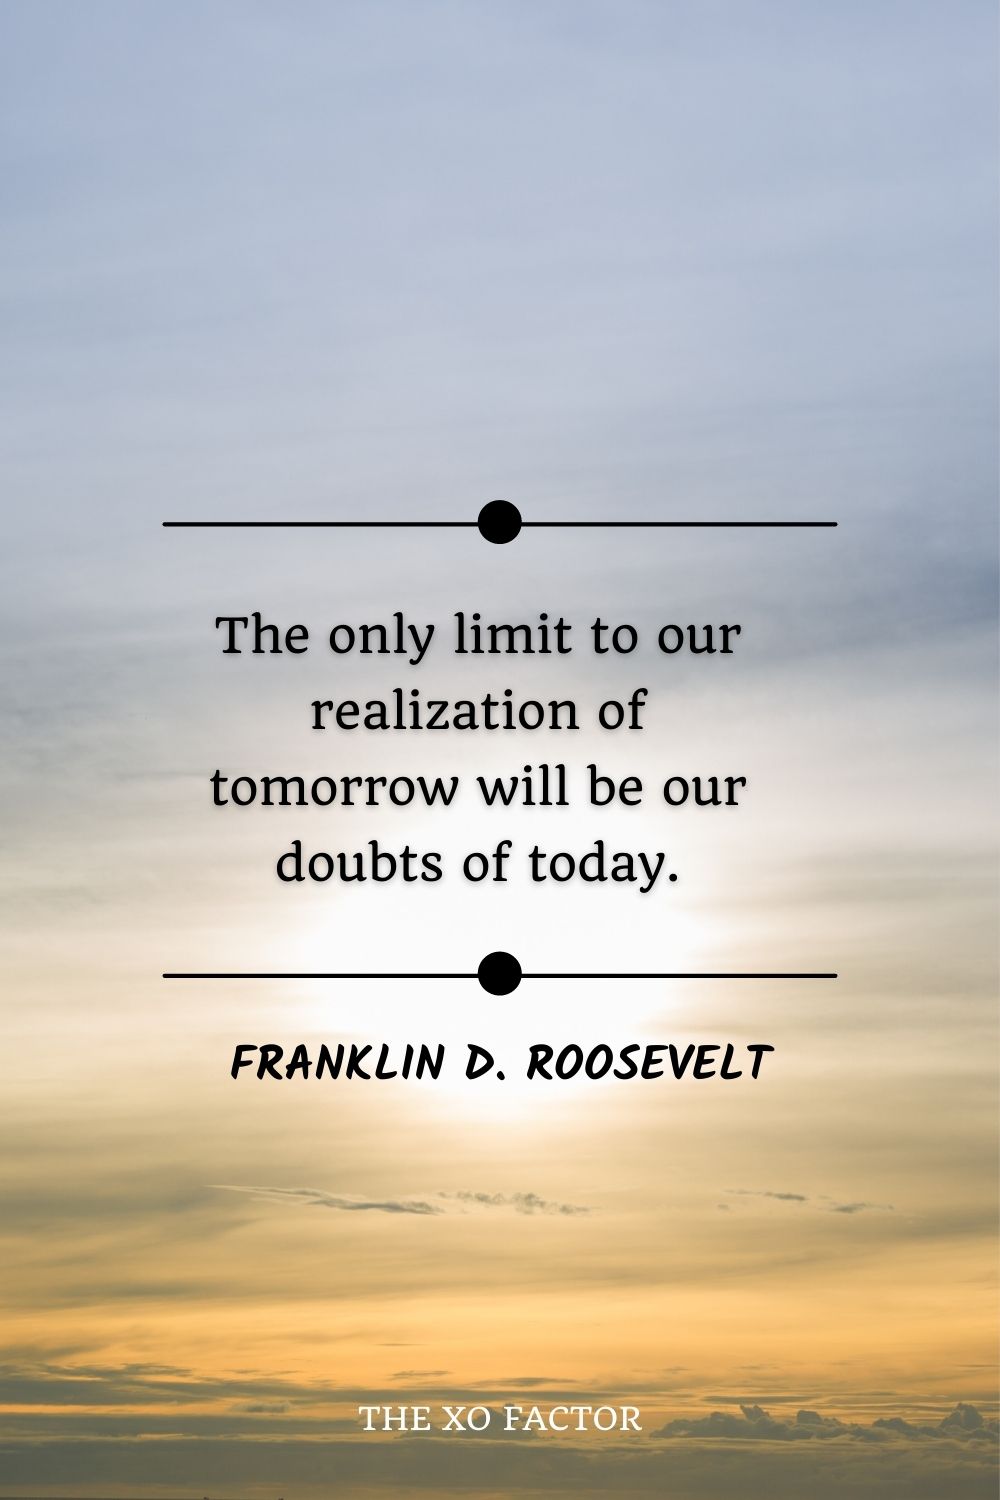 The only limit to our realization of tomorrow will be our doubts of today.” – Franklin D. Roosevelt